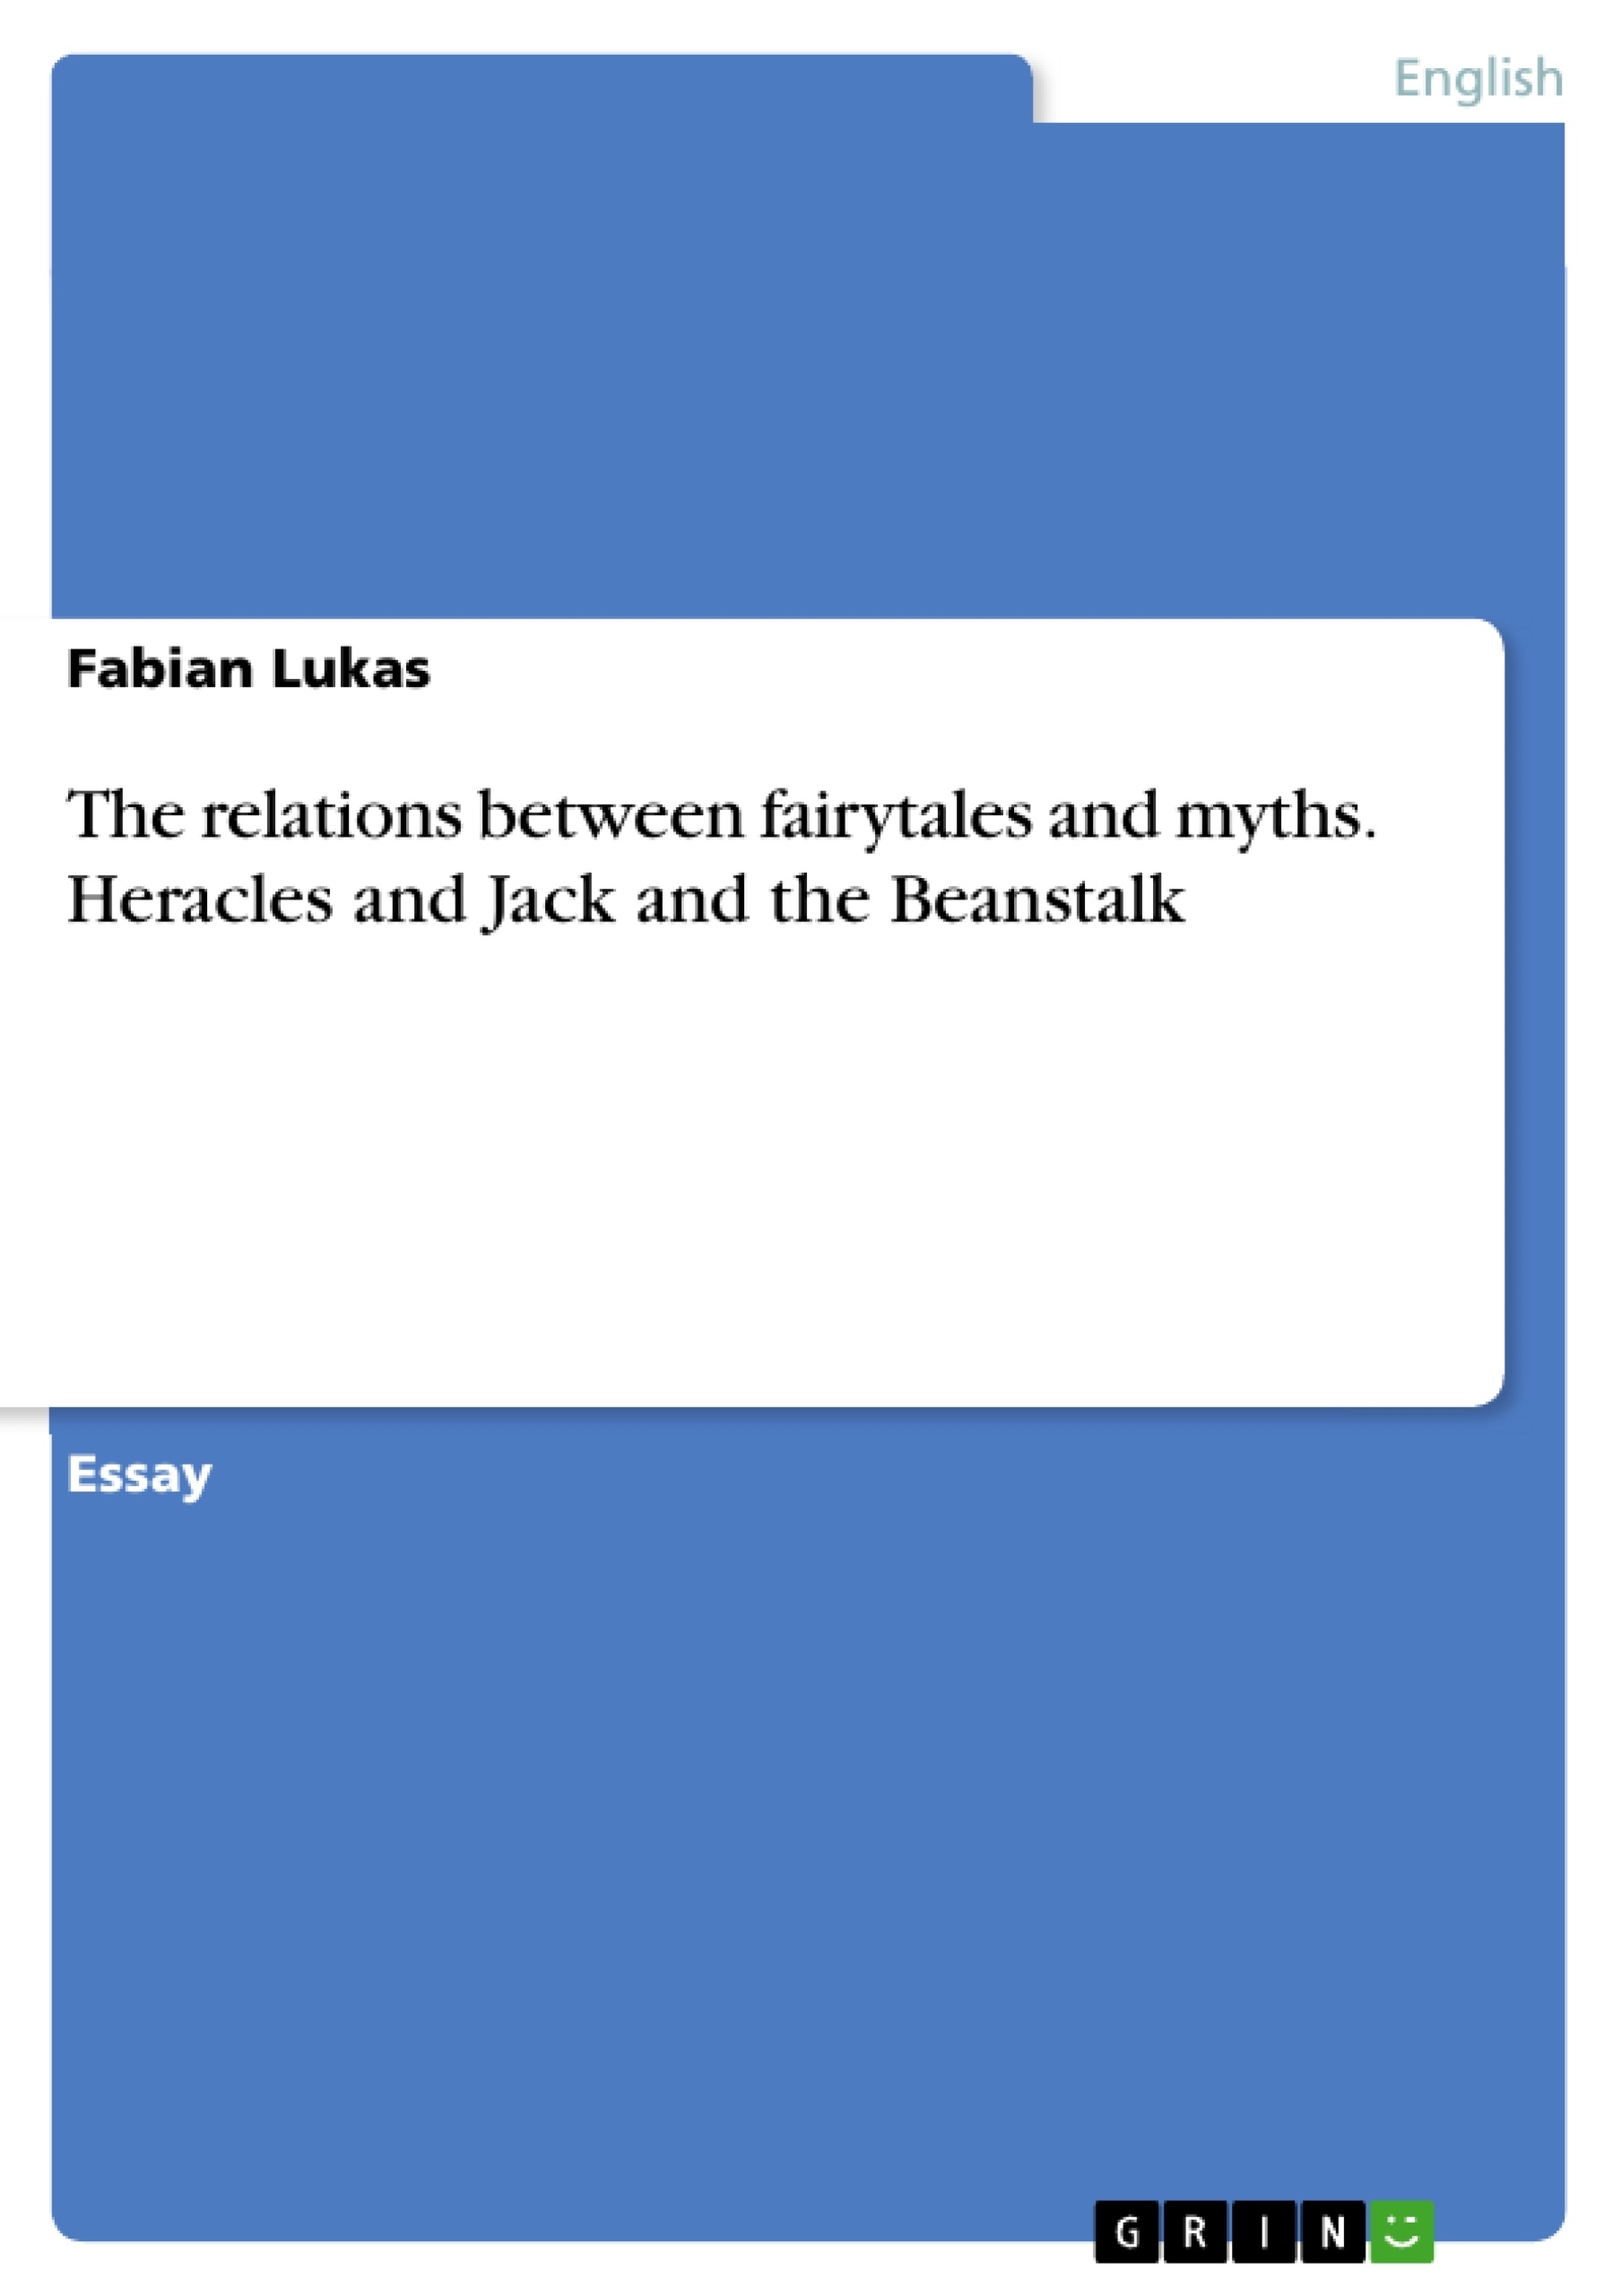 Title: The relations between fairytales and myths. Heracles and Jack and the Beanstalk